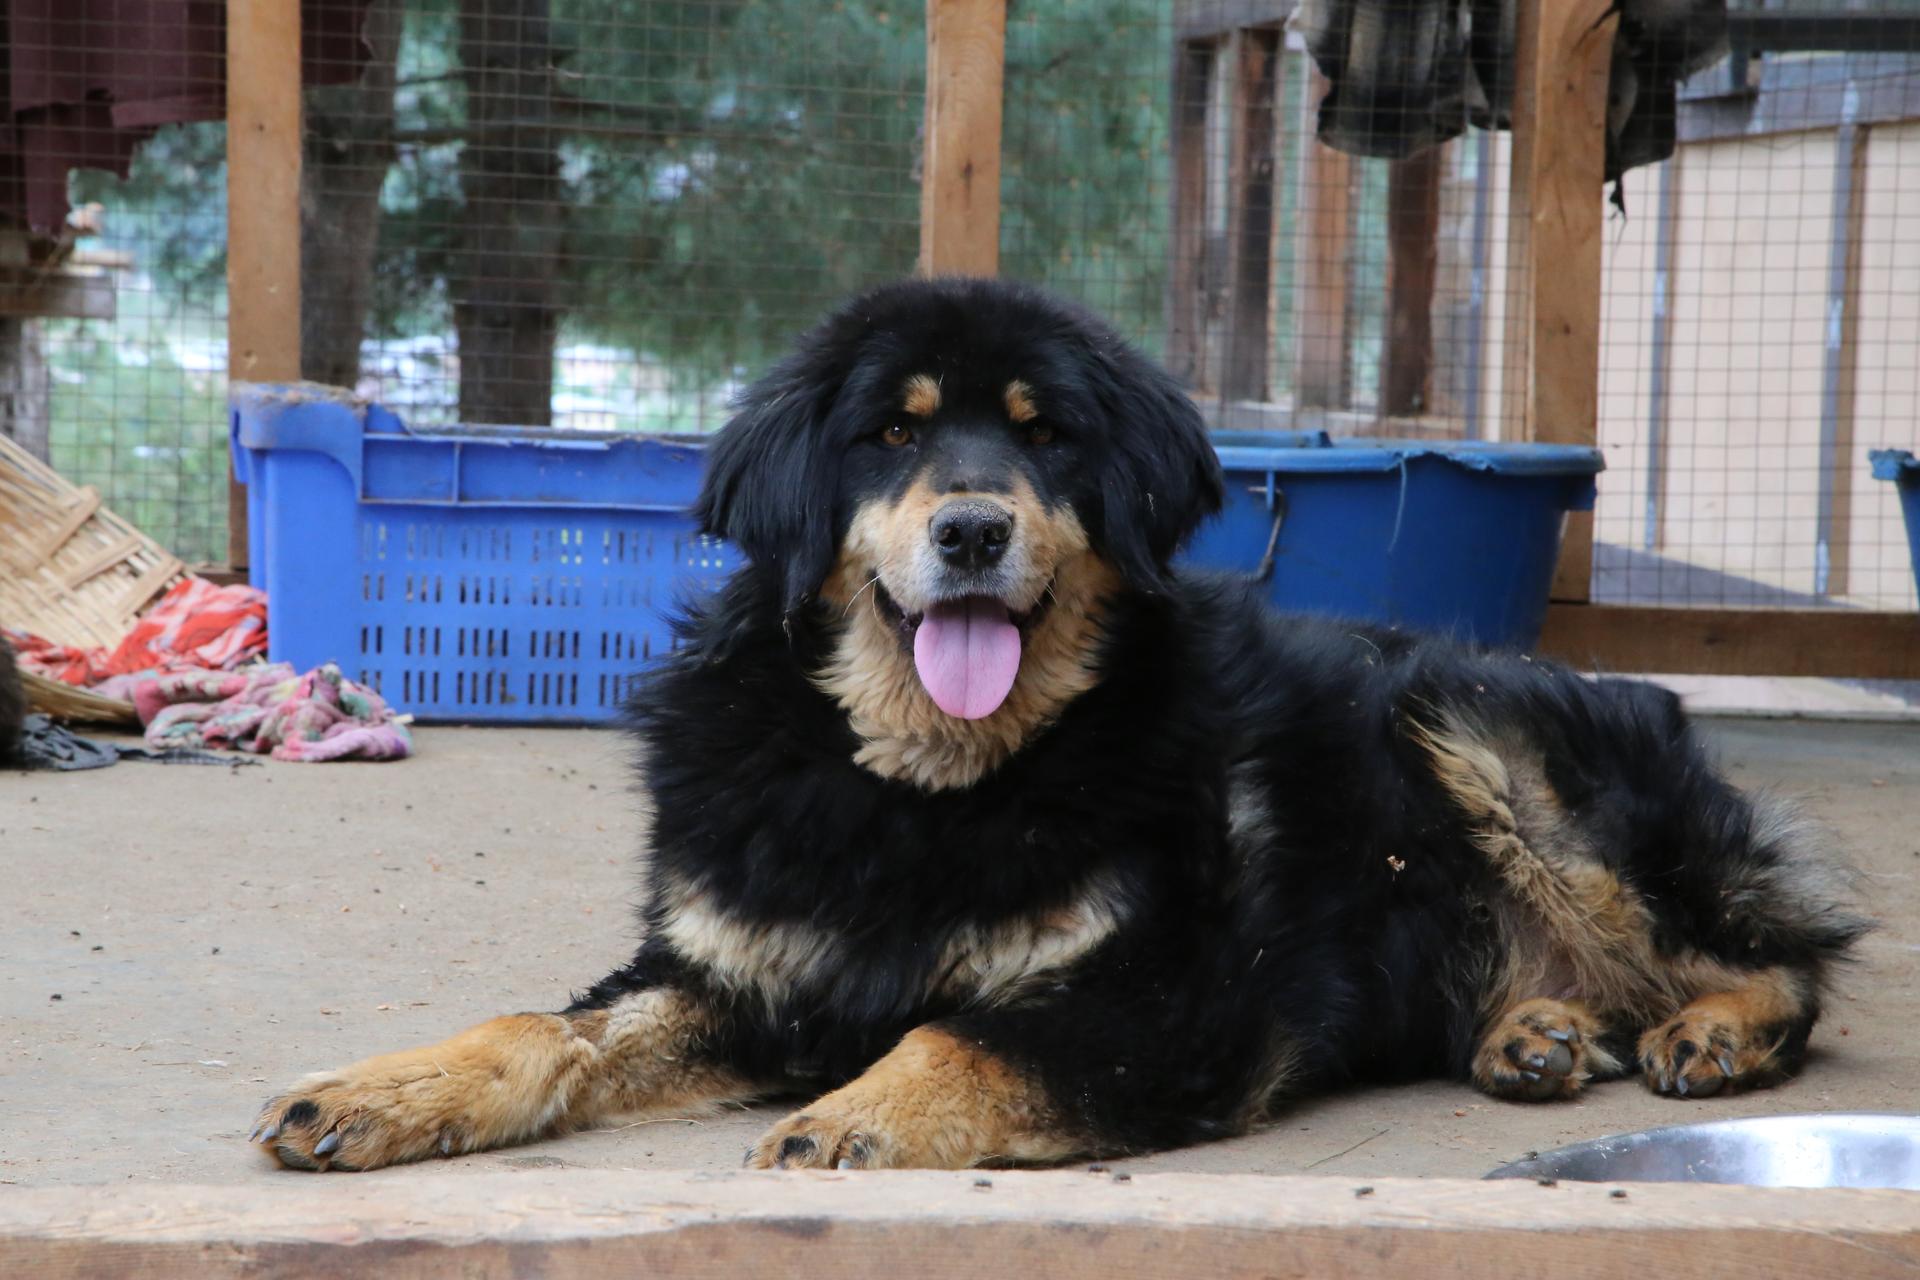 "Tim" is a street dog in Paro, Bhutan. He didn't always have such a gorgeous fur coat. He had terrible mange when a tourist rescued him. This gorgeous boy is pretty typical of the Bhutanese canine look.